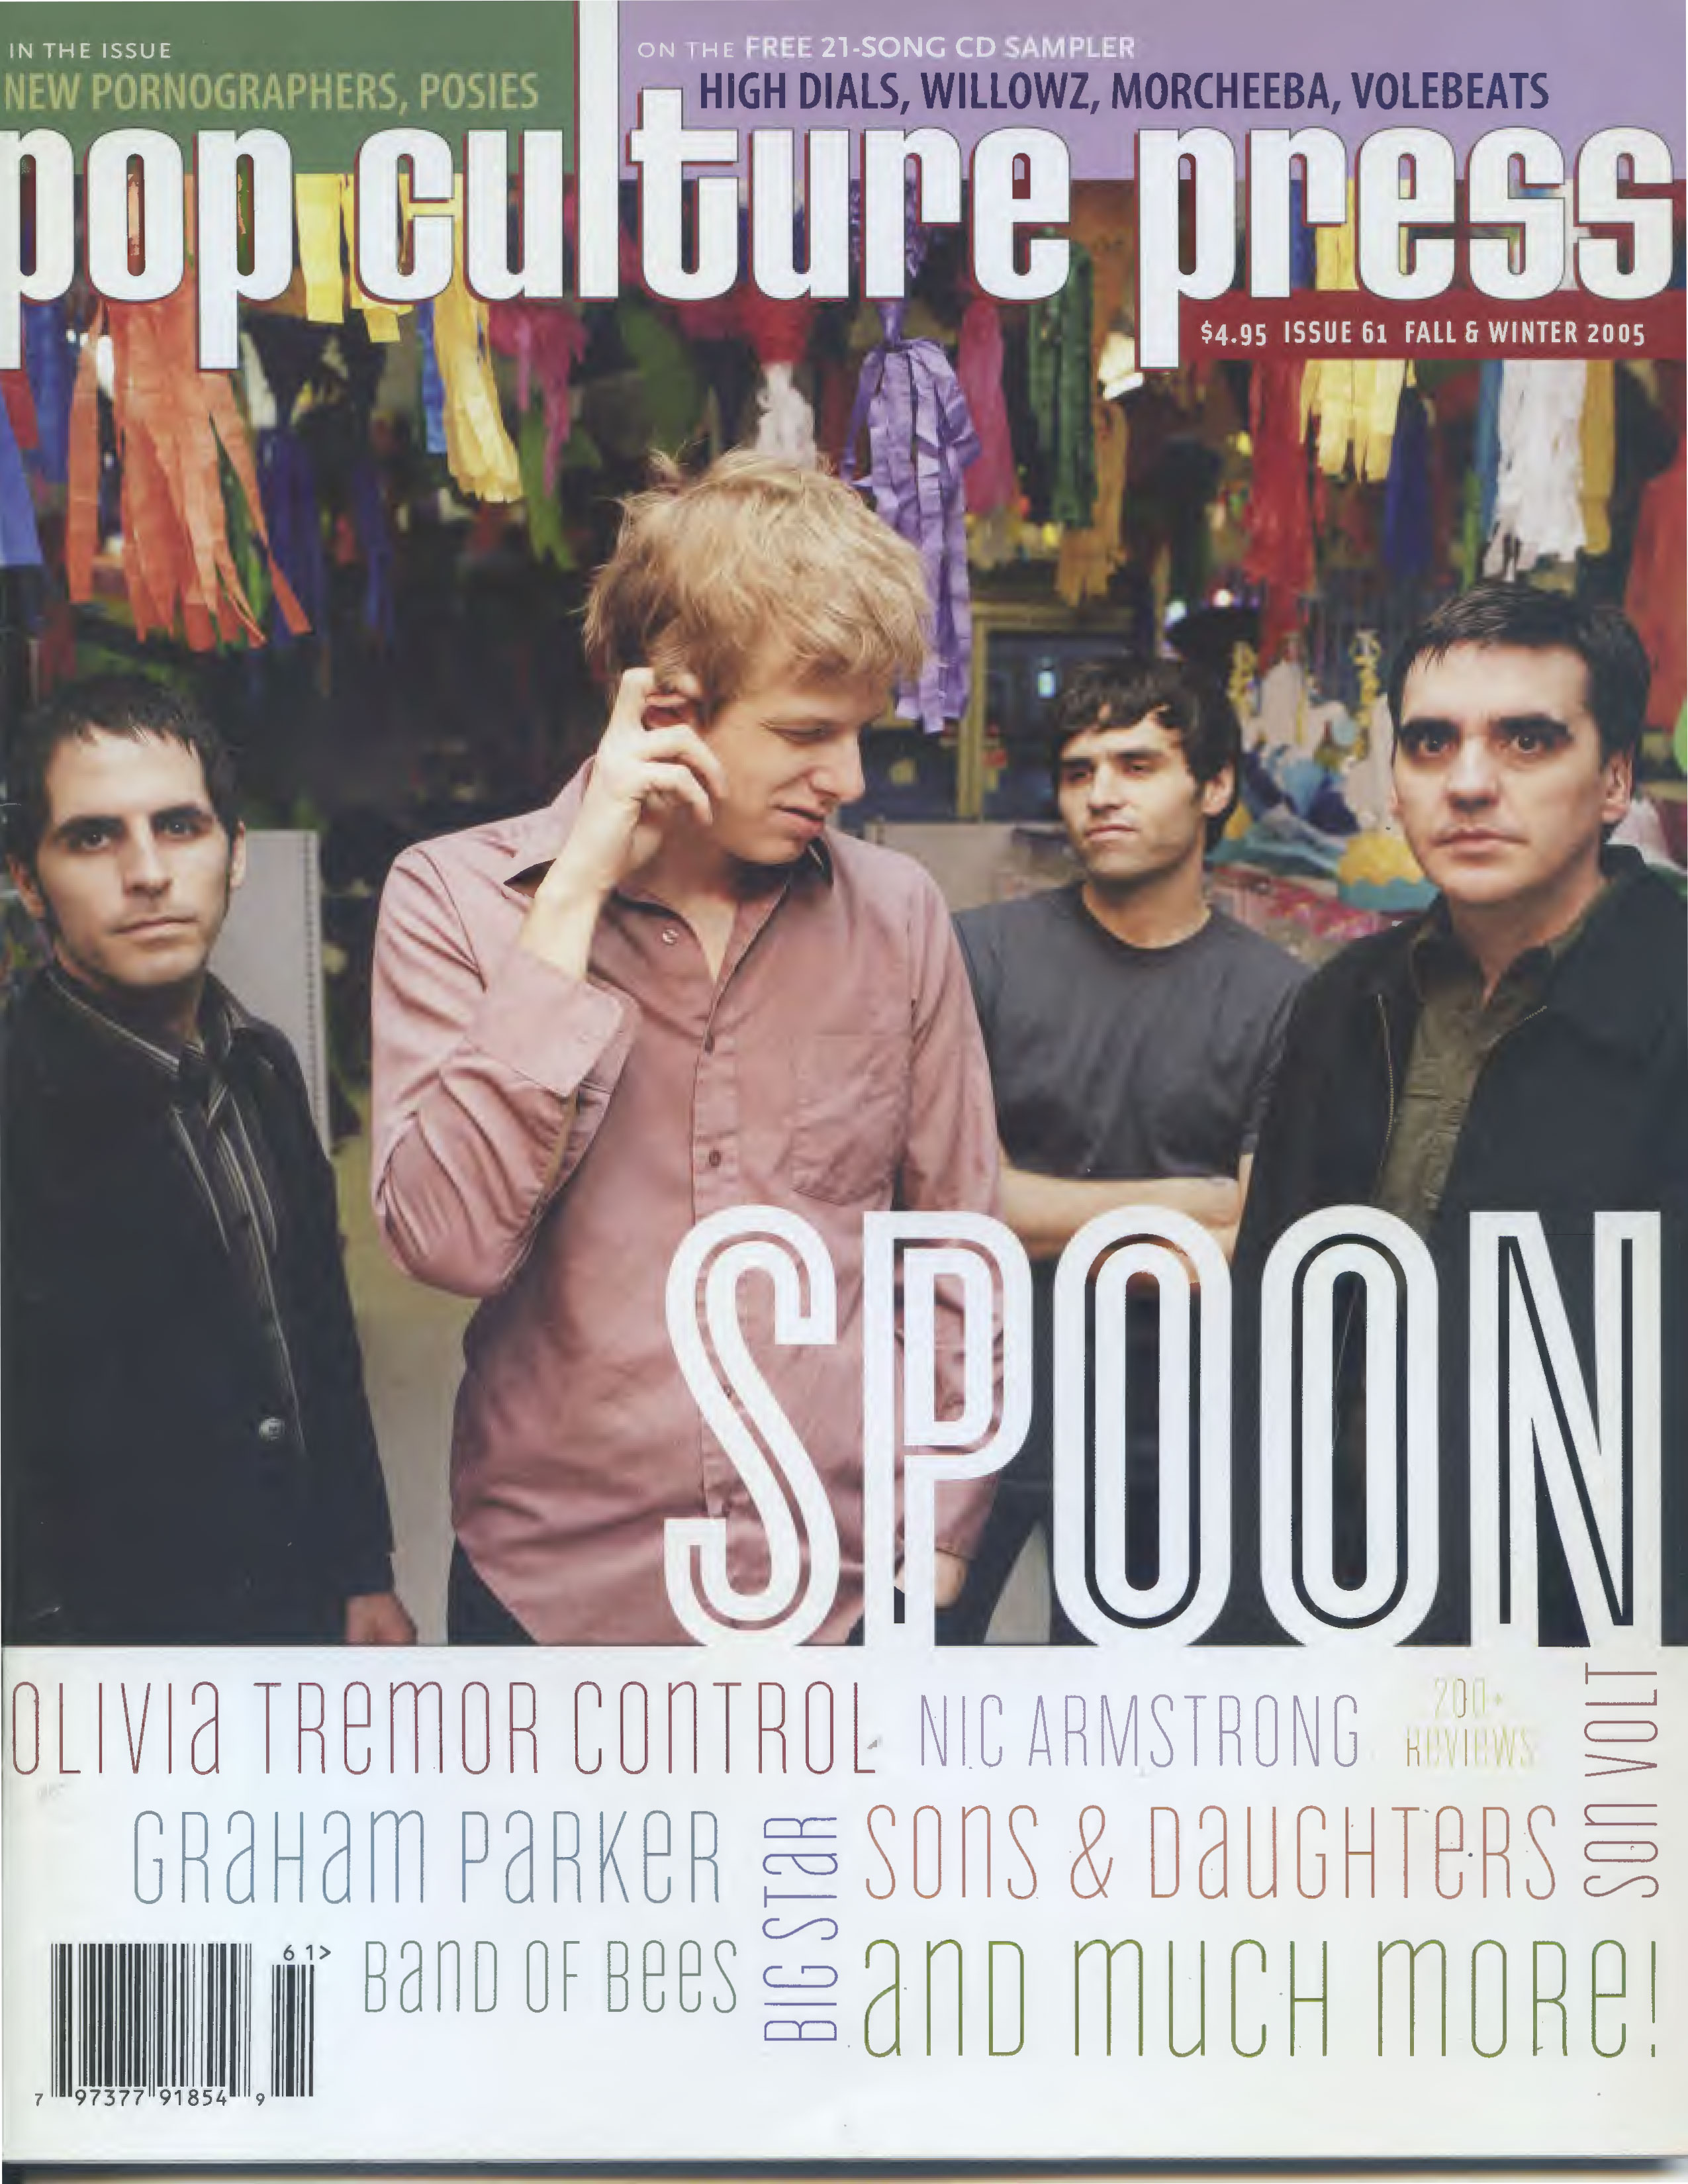 Spoon on the cover of Pop Culture Press Magazine